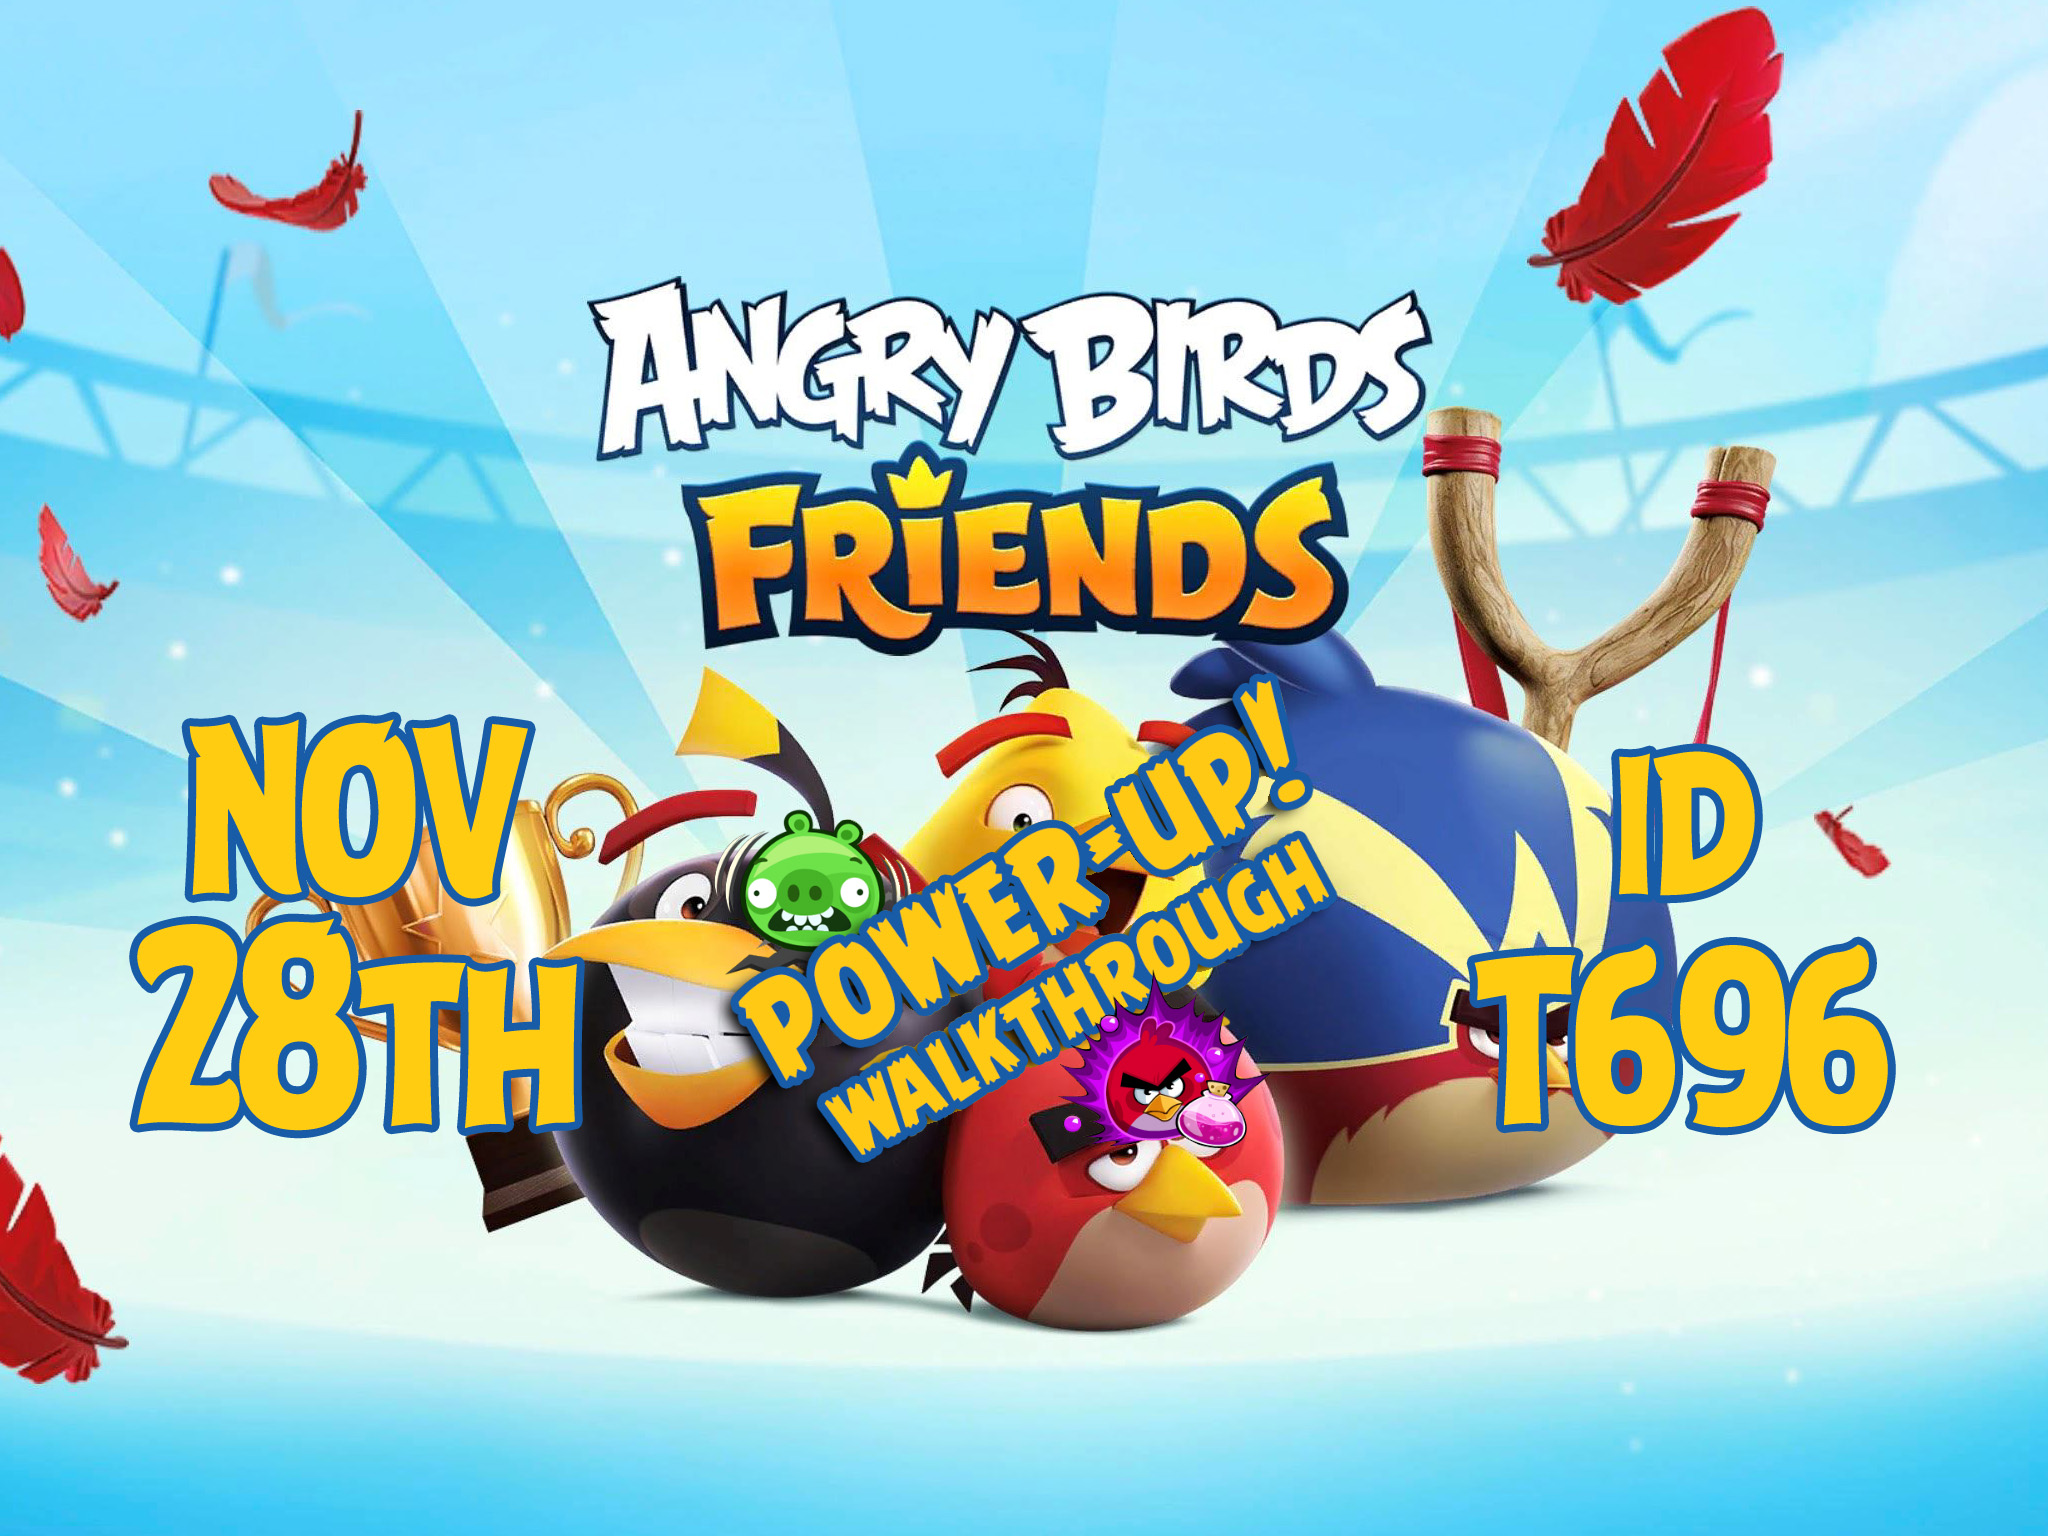 Angry-Birds-Friends-Tournament-T696-Feature-Image-PU